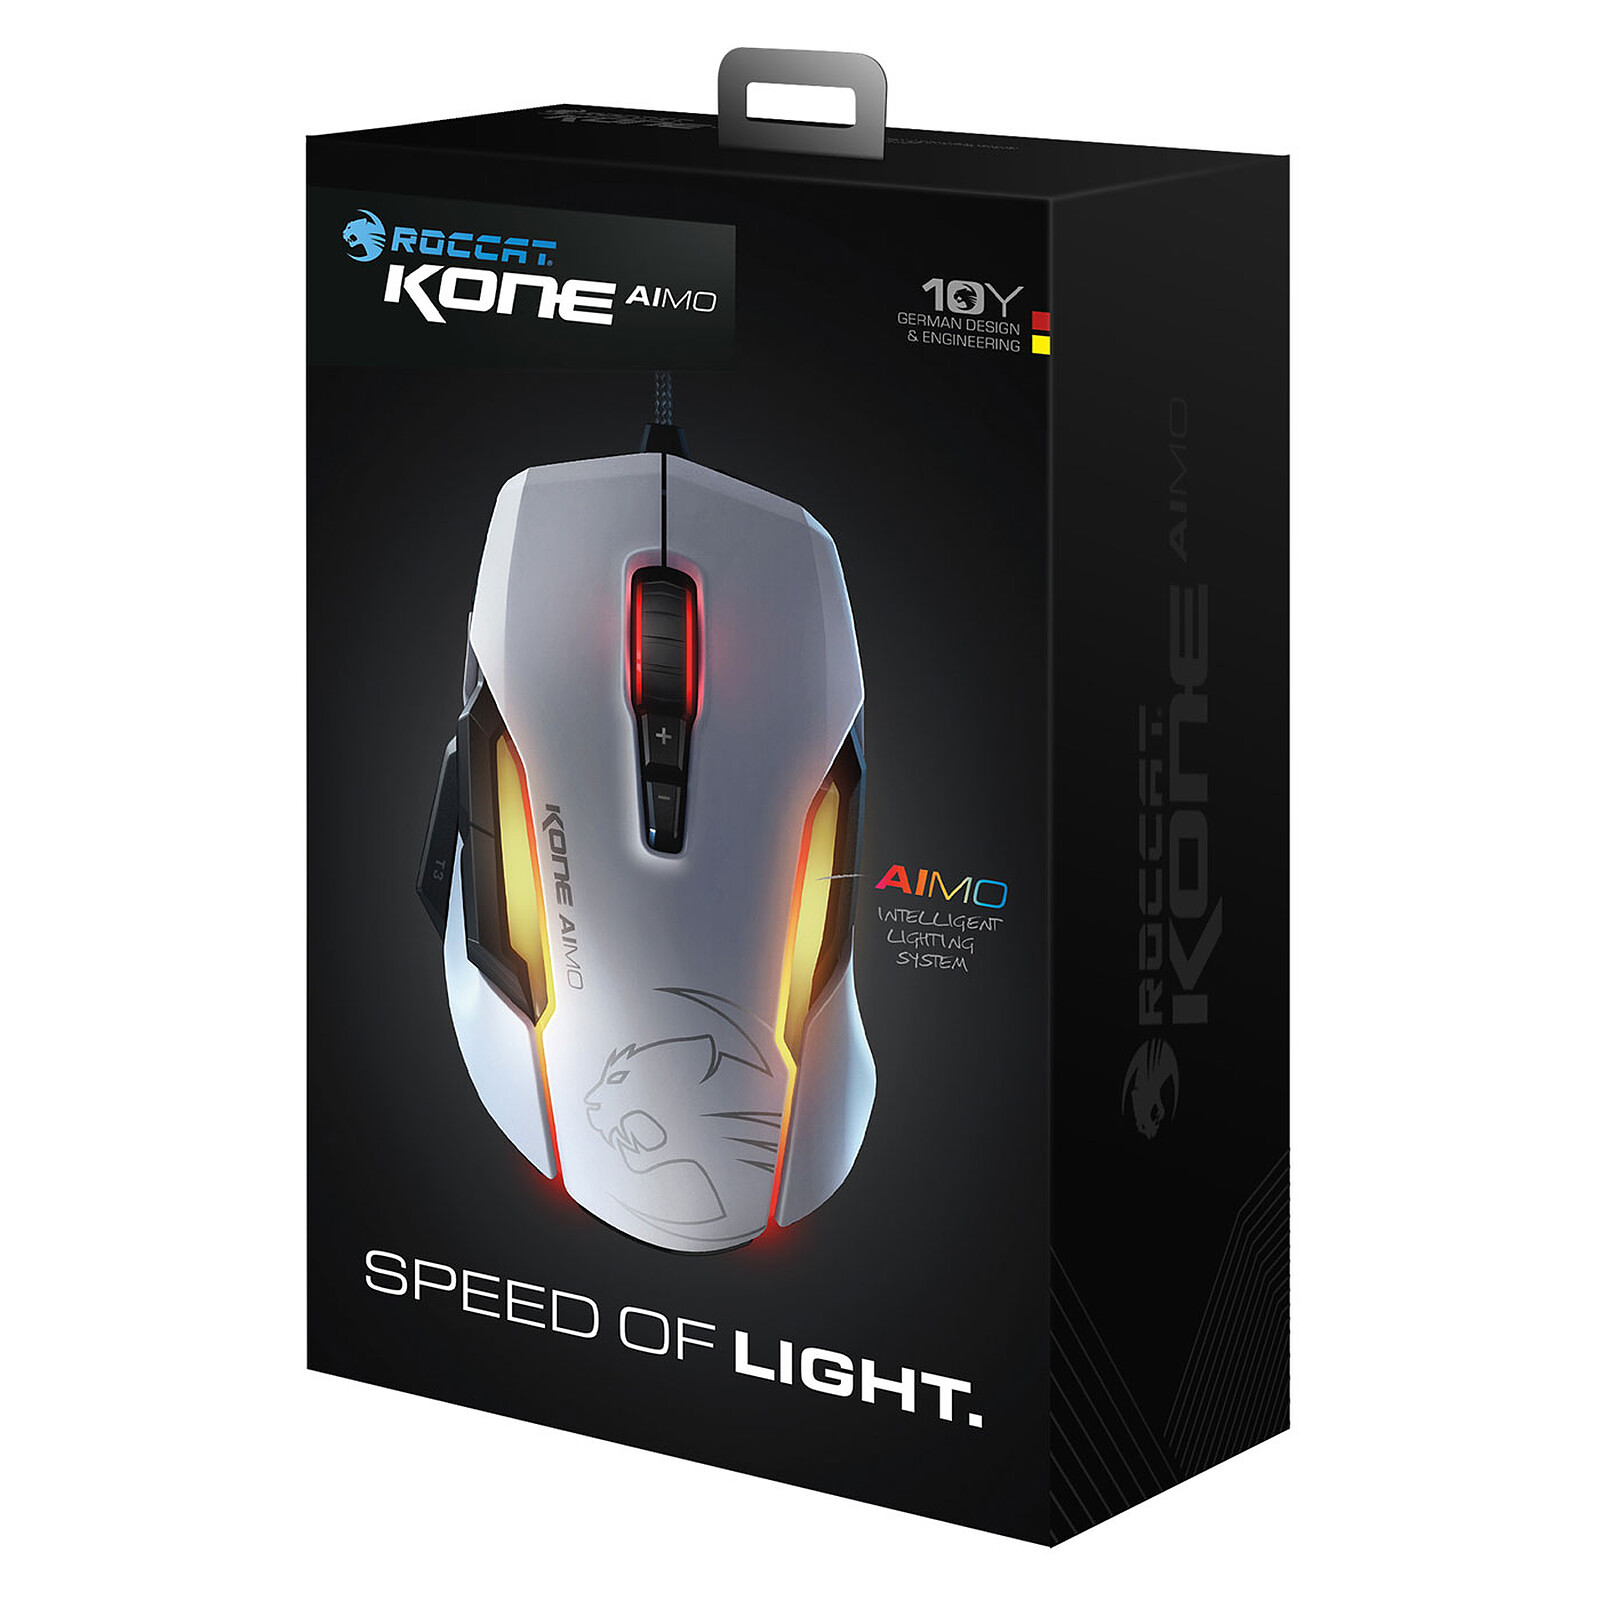 Kone Aimo Software : Roccat Kone Aimo Review Pcmag / The ...